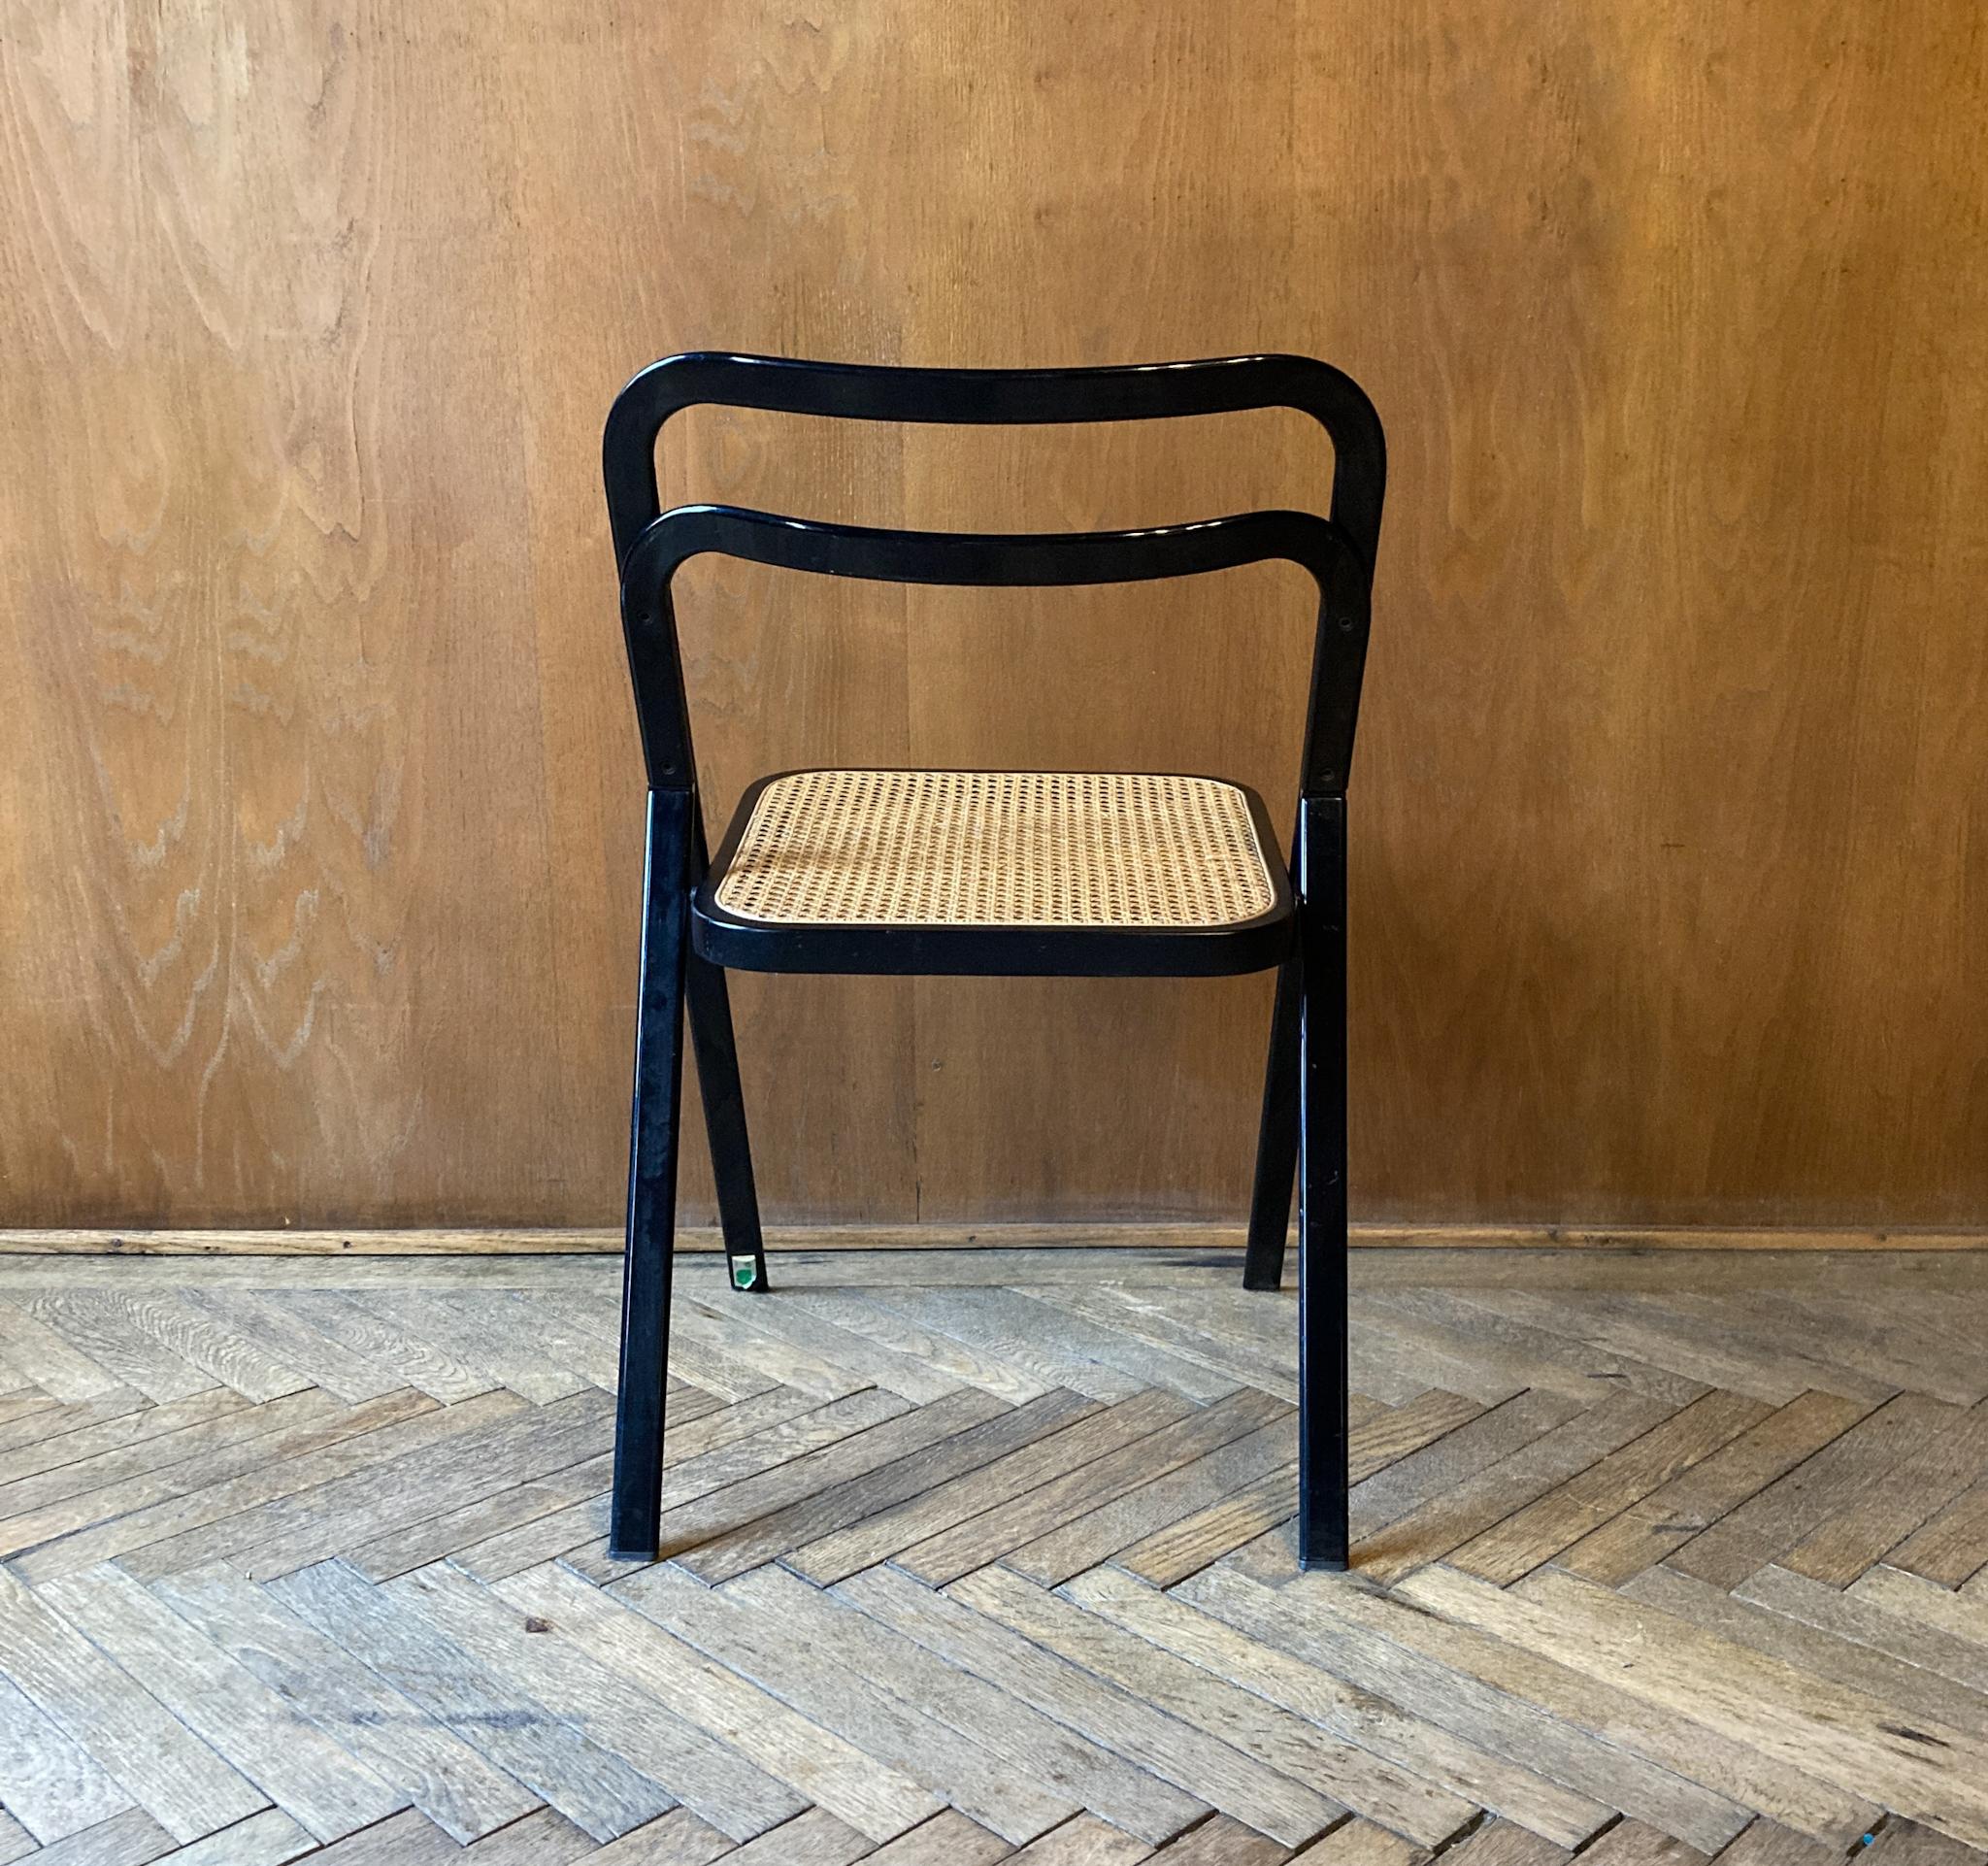 Metal Mid-Century Modern Folding Chairs Viennese Straw by G. Cattelan, Italy 1970s For Sale